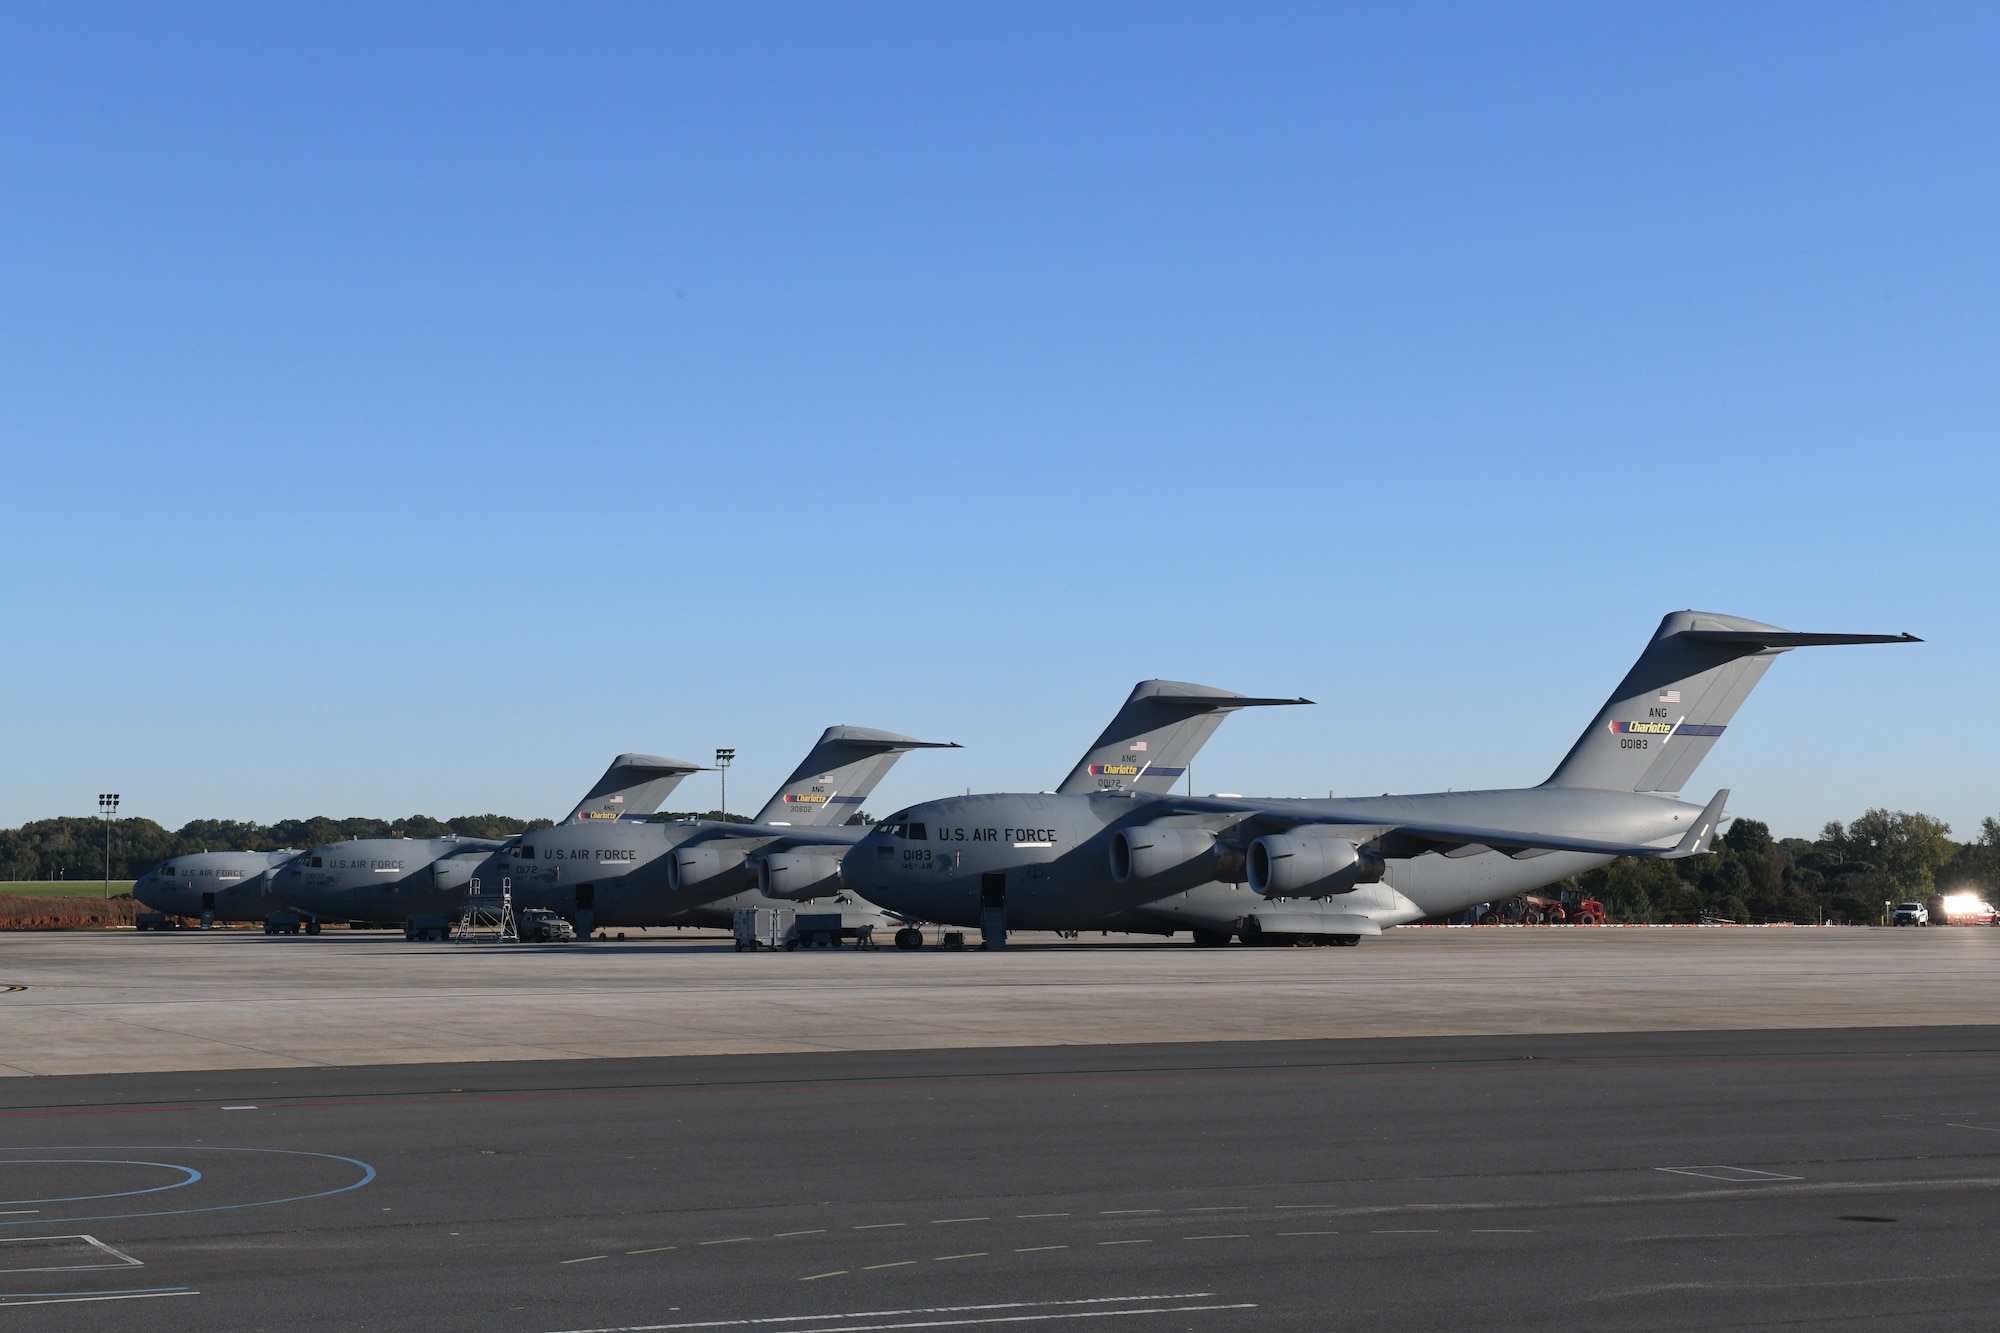 Five C-17 Globemaster III Aircraft belonging to the 145th Airlift Wing are parked in a row on a sunny day at the  North Carolina Air National Guard Base, Charlotte Douglas International Airport, October 14, 2020. The 145th Airlift Wing began converting from C-130 Hercules to the C-17 in October of 2017 and officially exited conversion in October 2020.